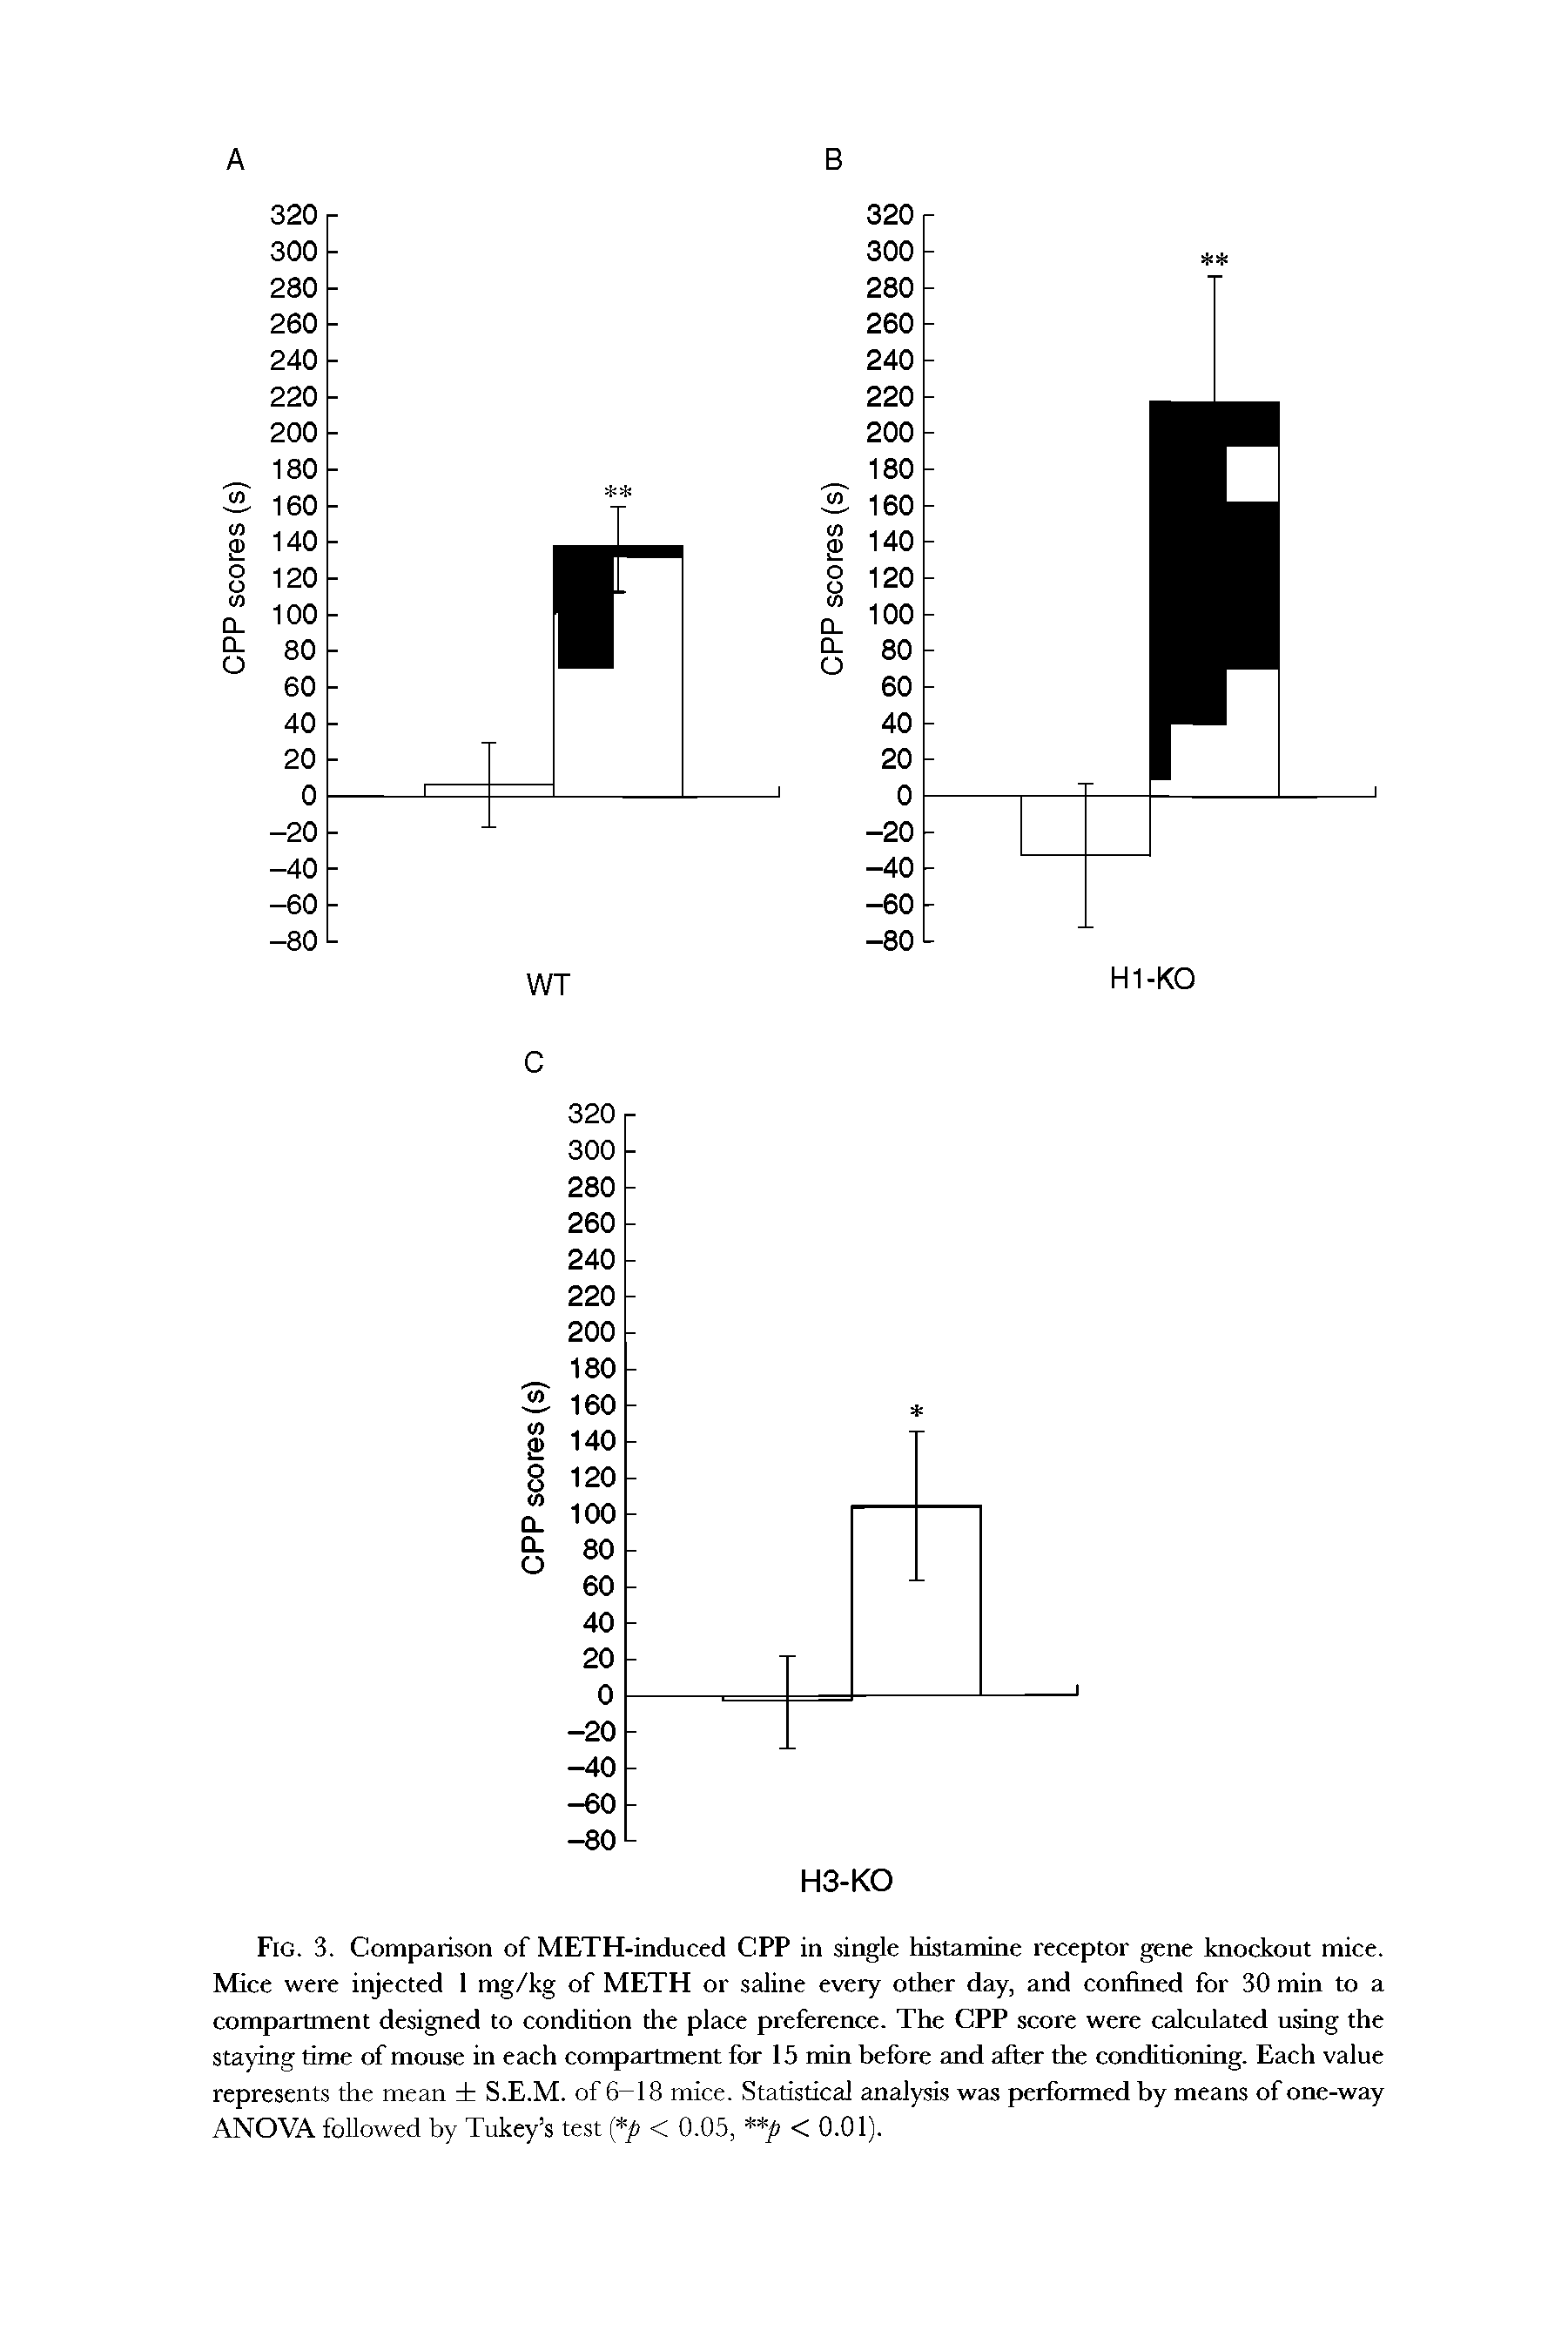 Fig. 3. Comparison of METH-induced CPP in single histamine receptor gene knockout mice. Mice were injected 1 mg/kg of METH or saline every other day, and confined for 30 min to a compartment designed to condition the place preference. The CPP score were calculated using the staying time of mouse in each compartment for 15 min before and after the conditioning. Each value represents the mean S.E.M. of 6-18 mice. Statistical analysis was performed by means of one-way ANOVA followed by Tukey s test ( p < 0.05, p < 0.01).